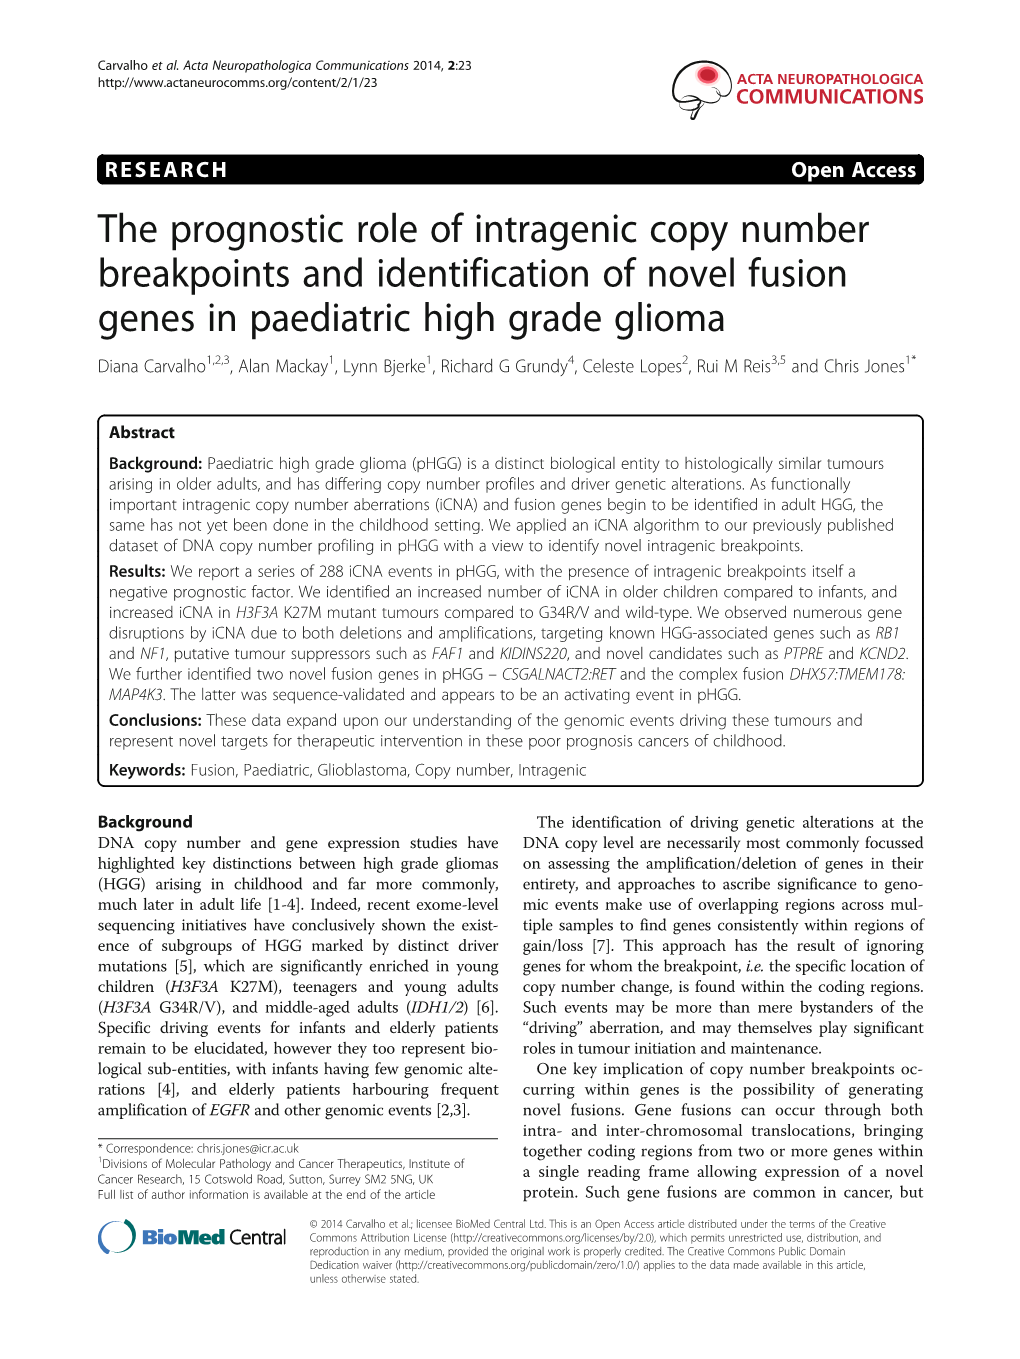 The Prognostic Role of Intragenic Copy Number Breakpoints And